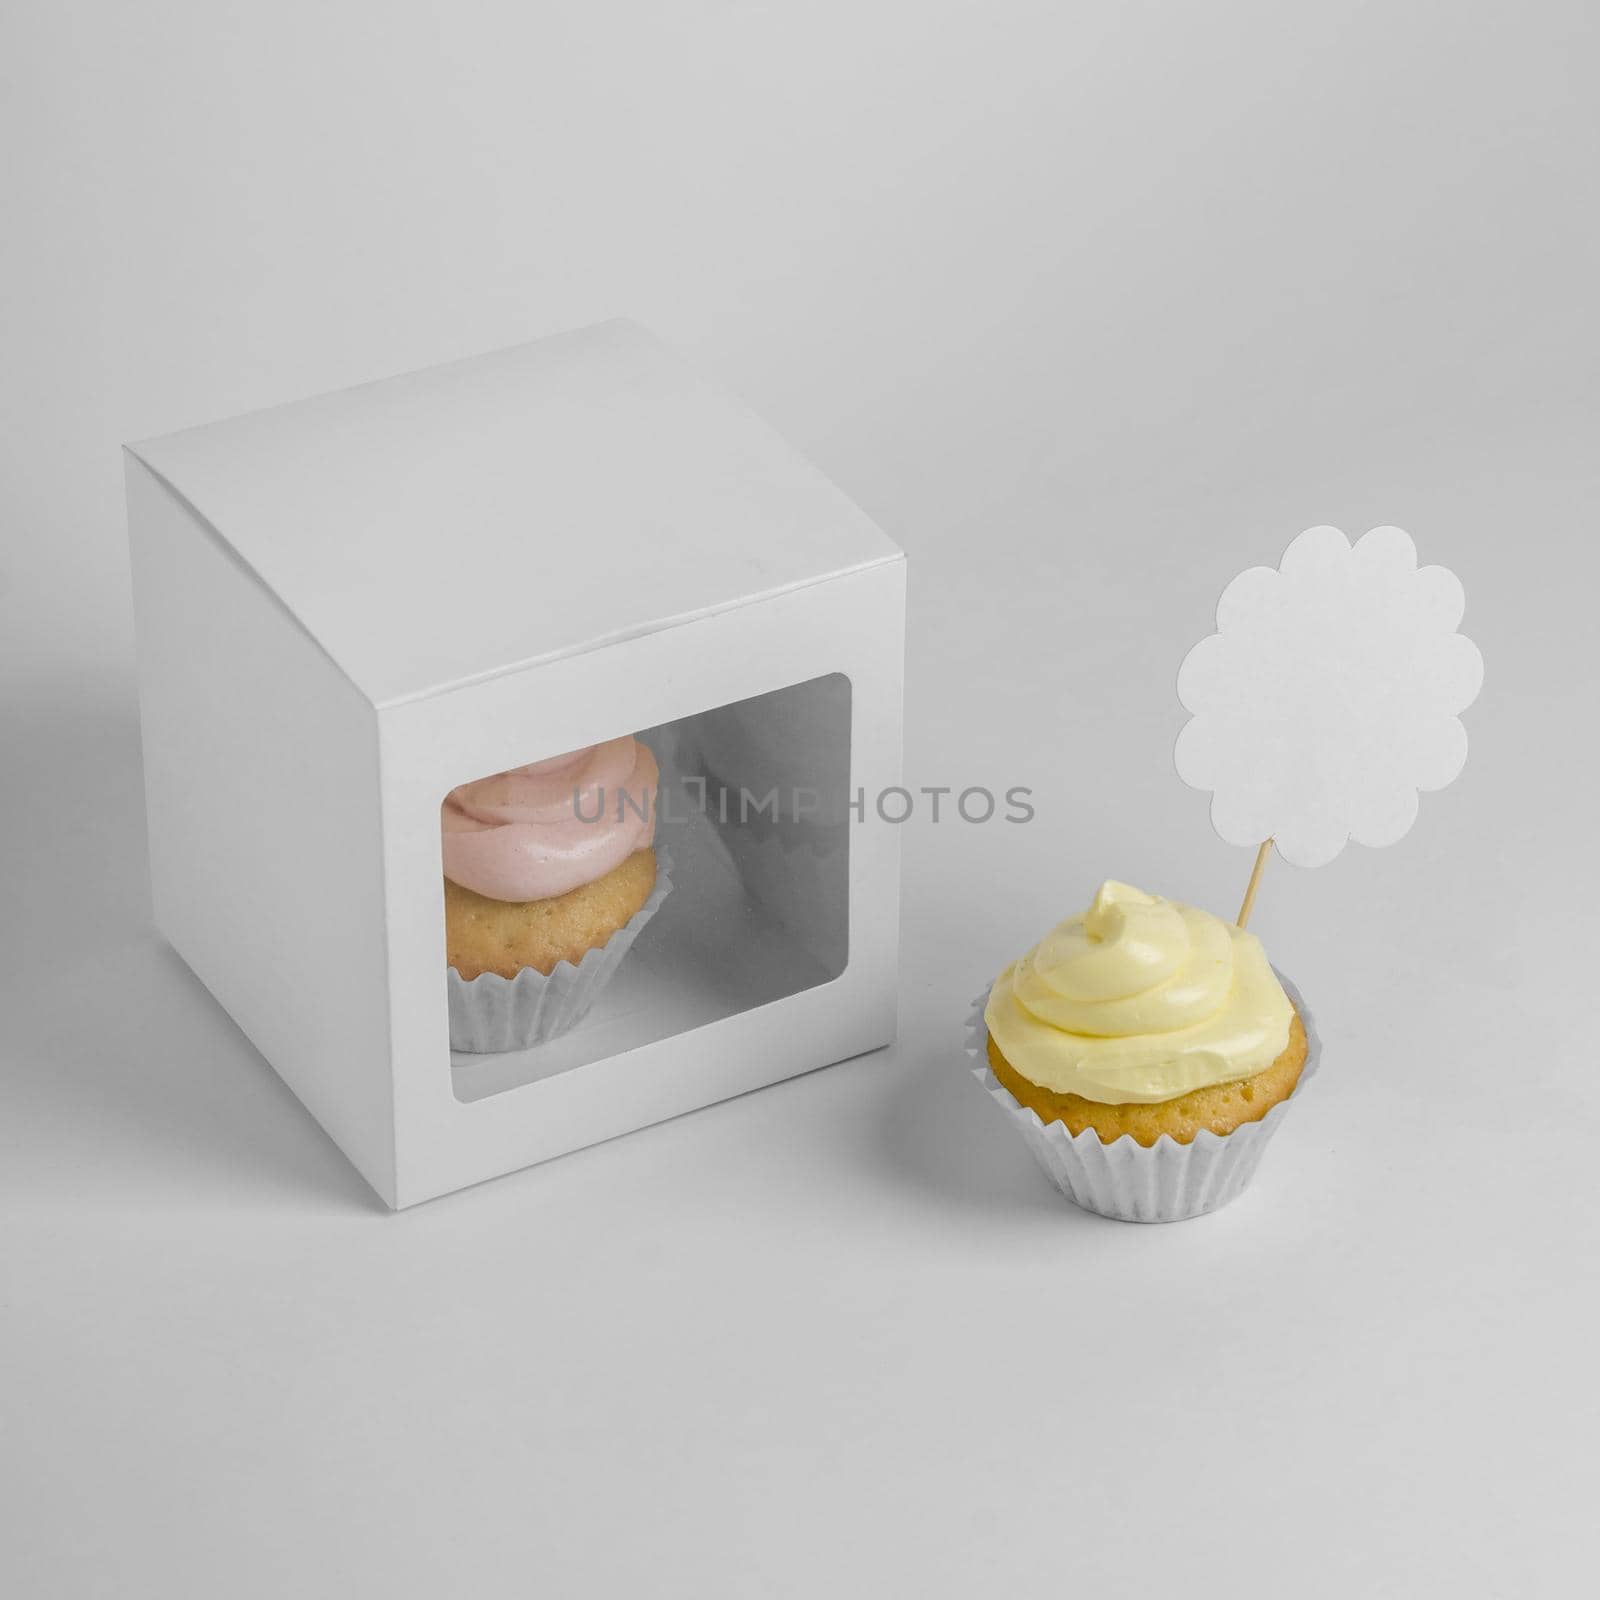 high angle two cupcakes with packaging box by Zahard